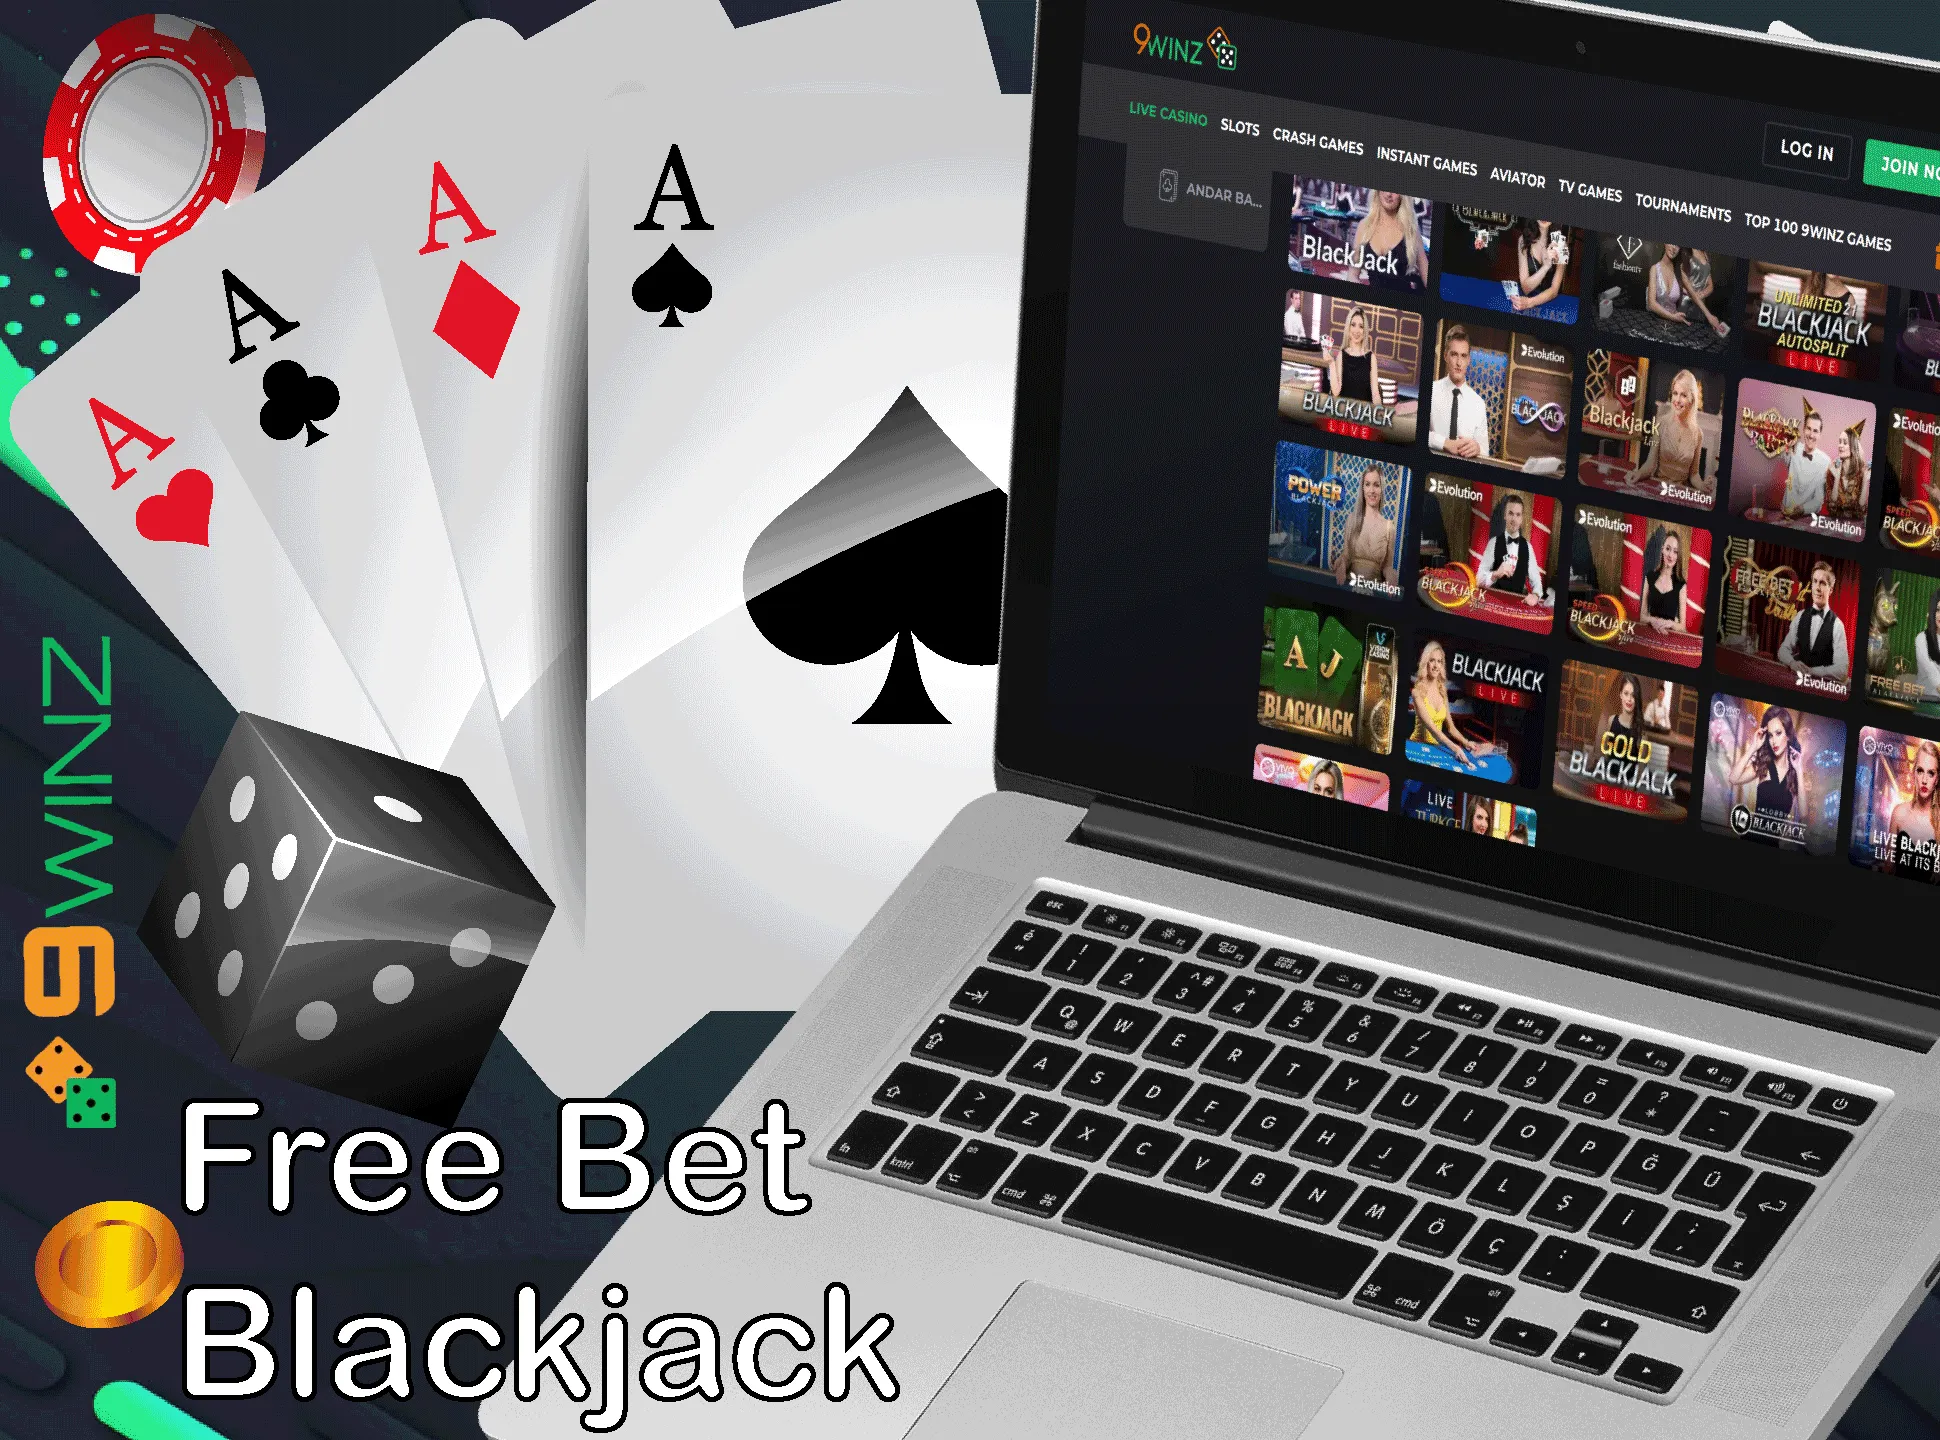 Play safe with free bet blackjack at the 9winz casino.